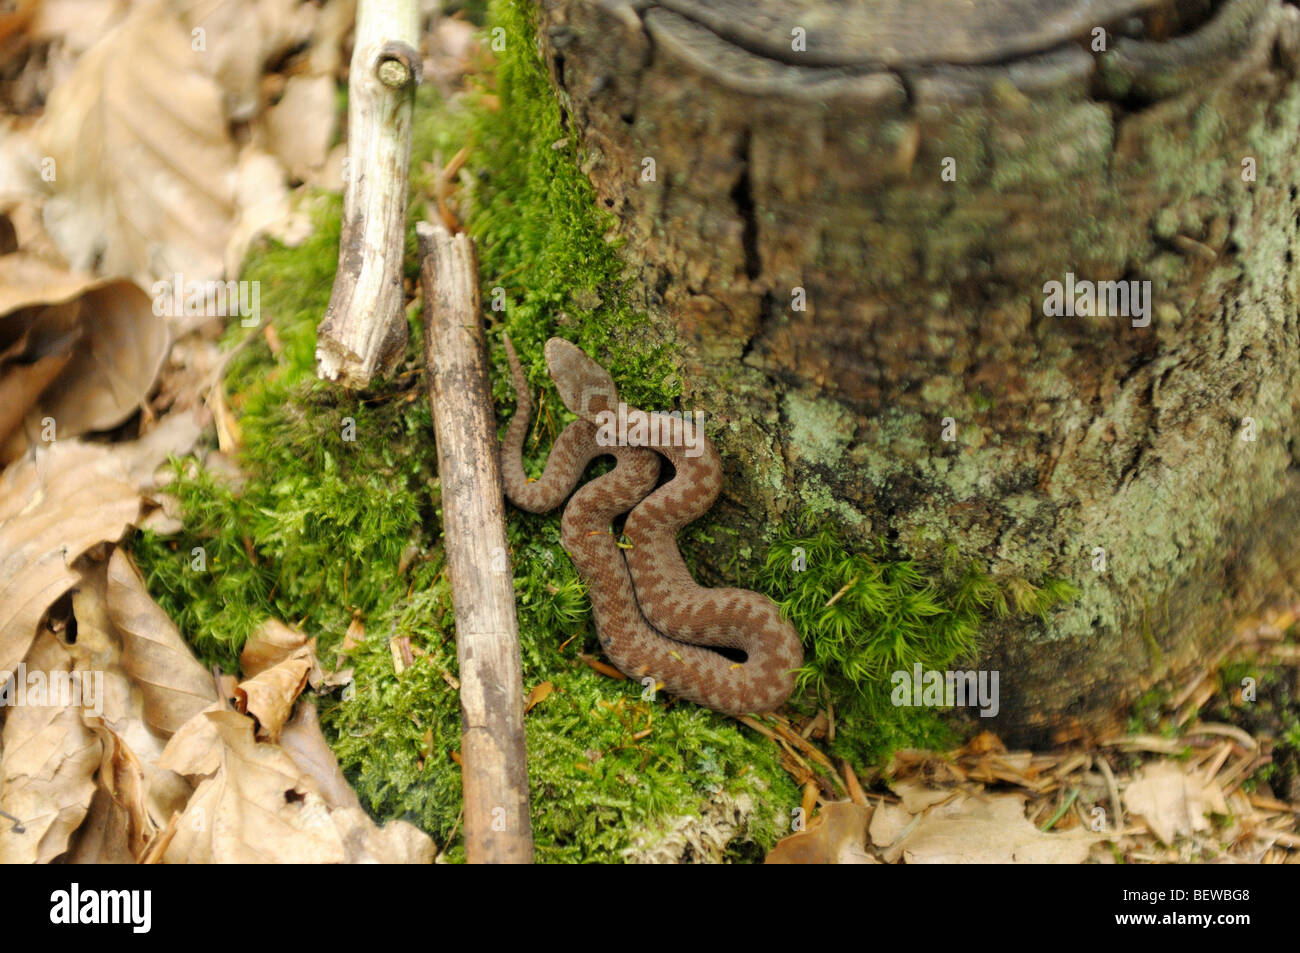 young sand viper curled up on moss, germany Stock Photo